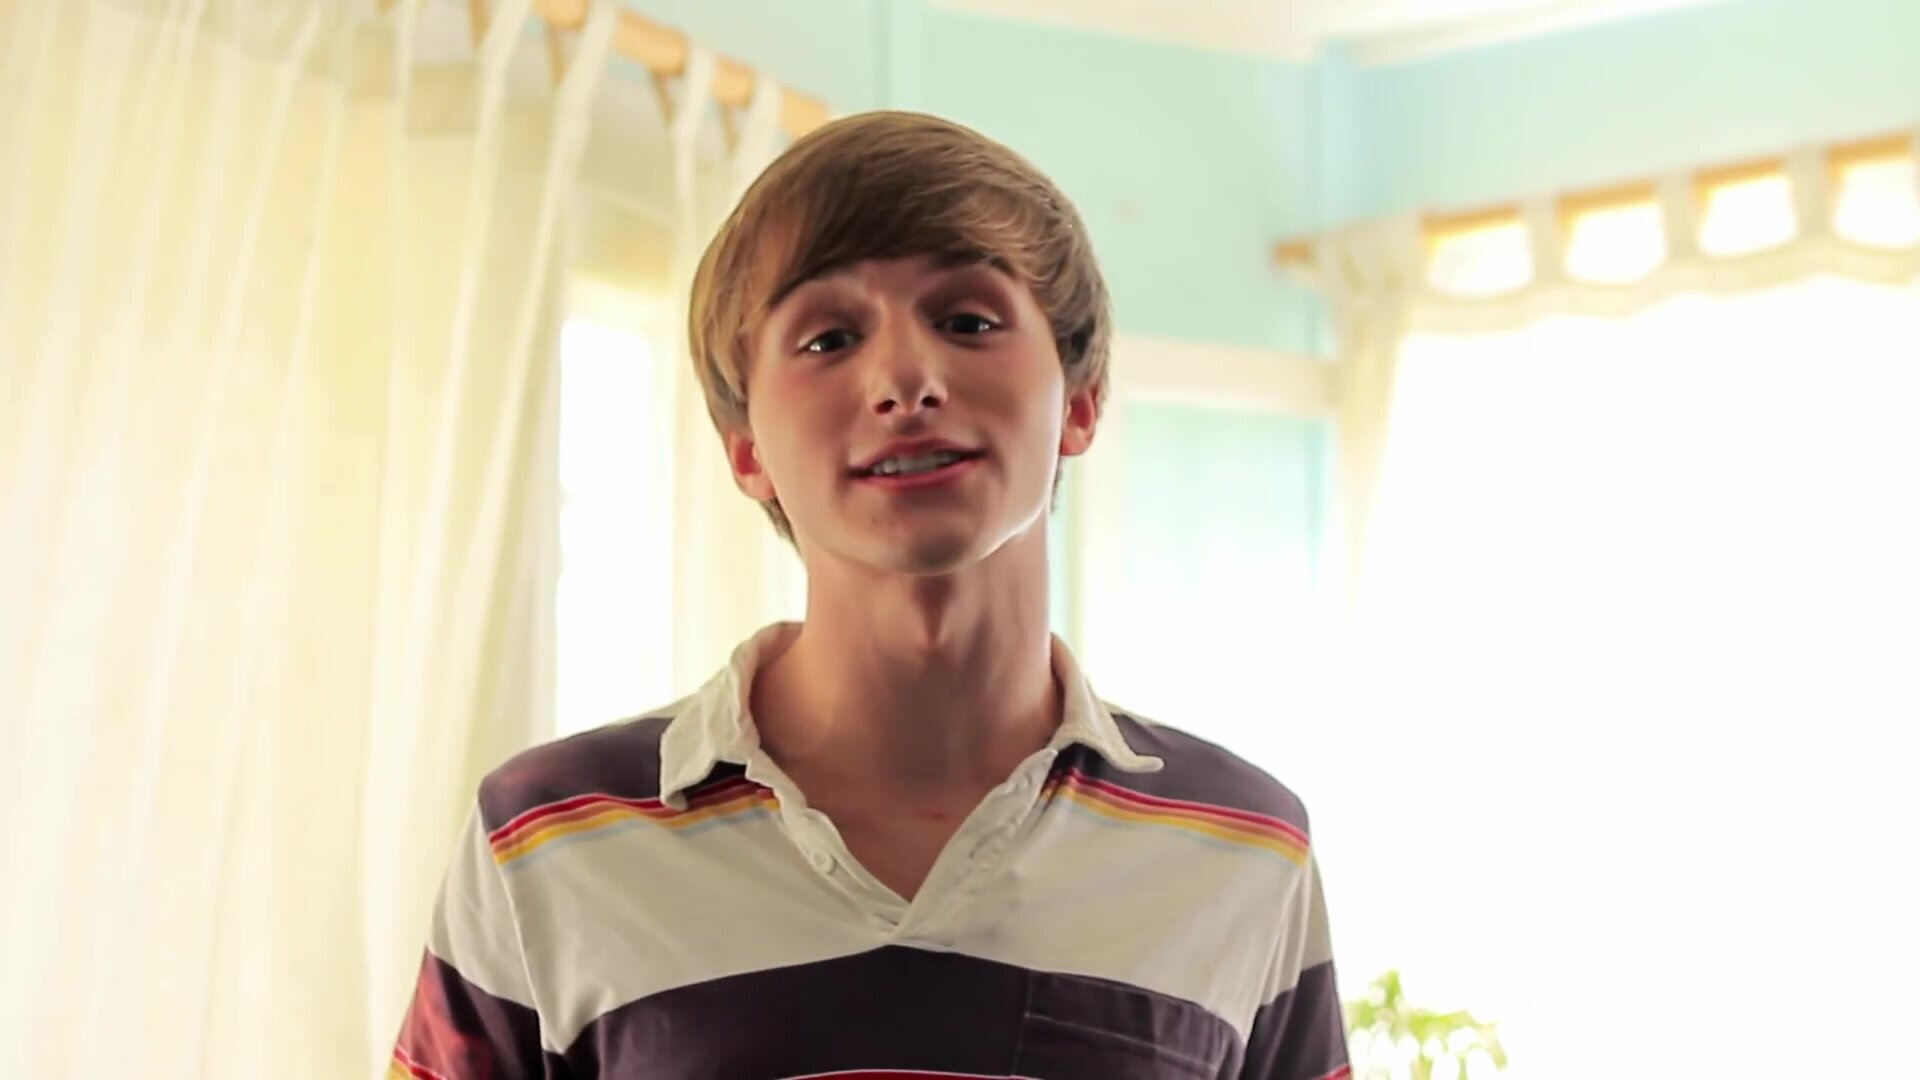 fred figglehorn the movie